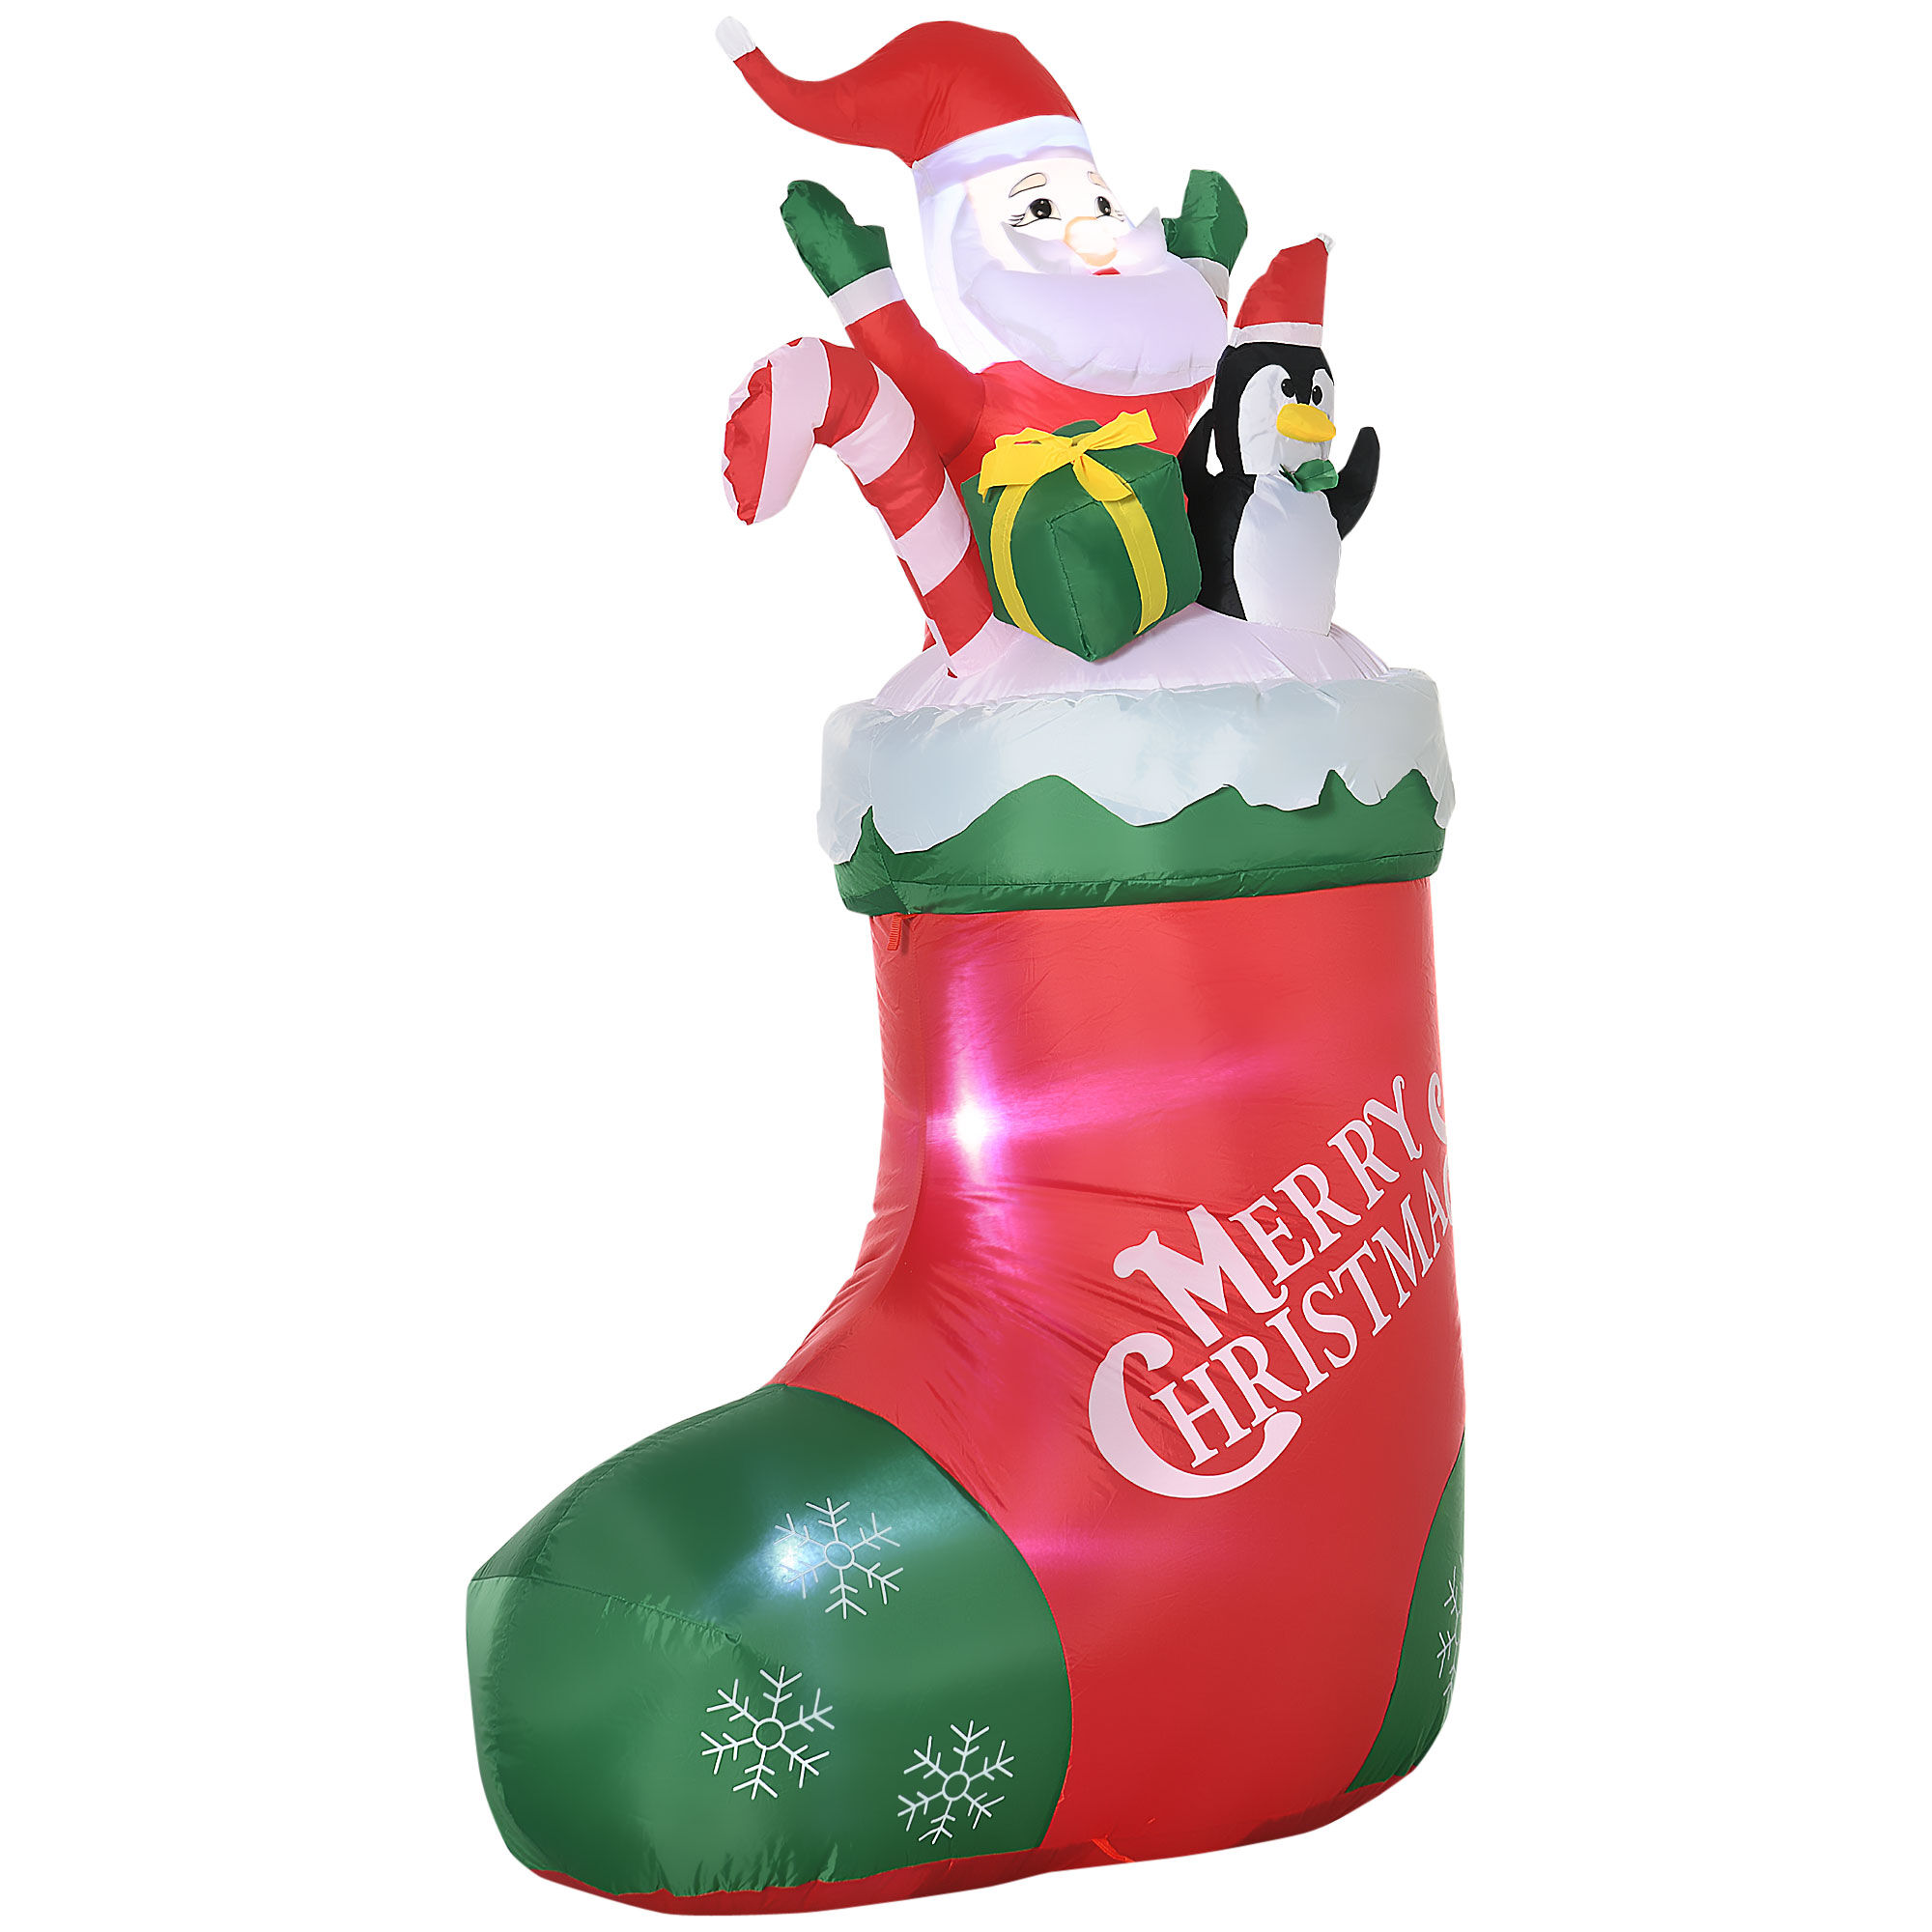 Outsunny 5ft Christmas Inflatable Santa and Penguin Standing in Sock with Candy Cane Gift Box, Blow-Up Outdoor LED Yard Display for Lawn Garden Party